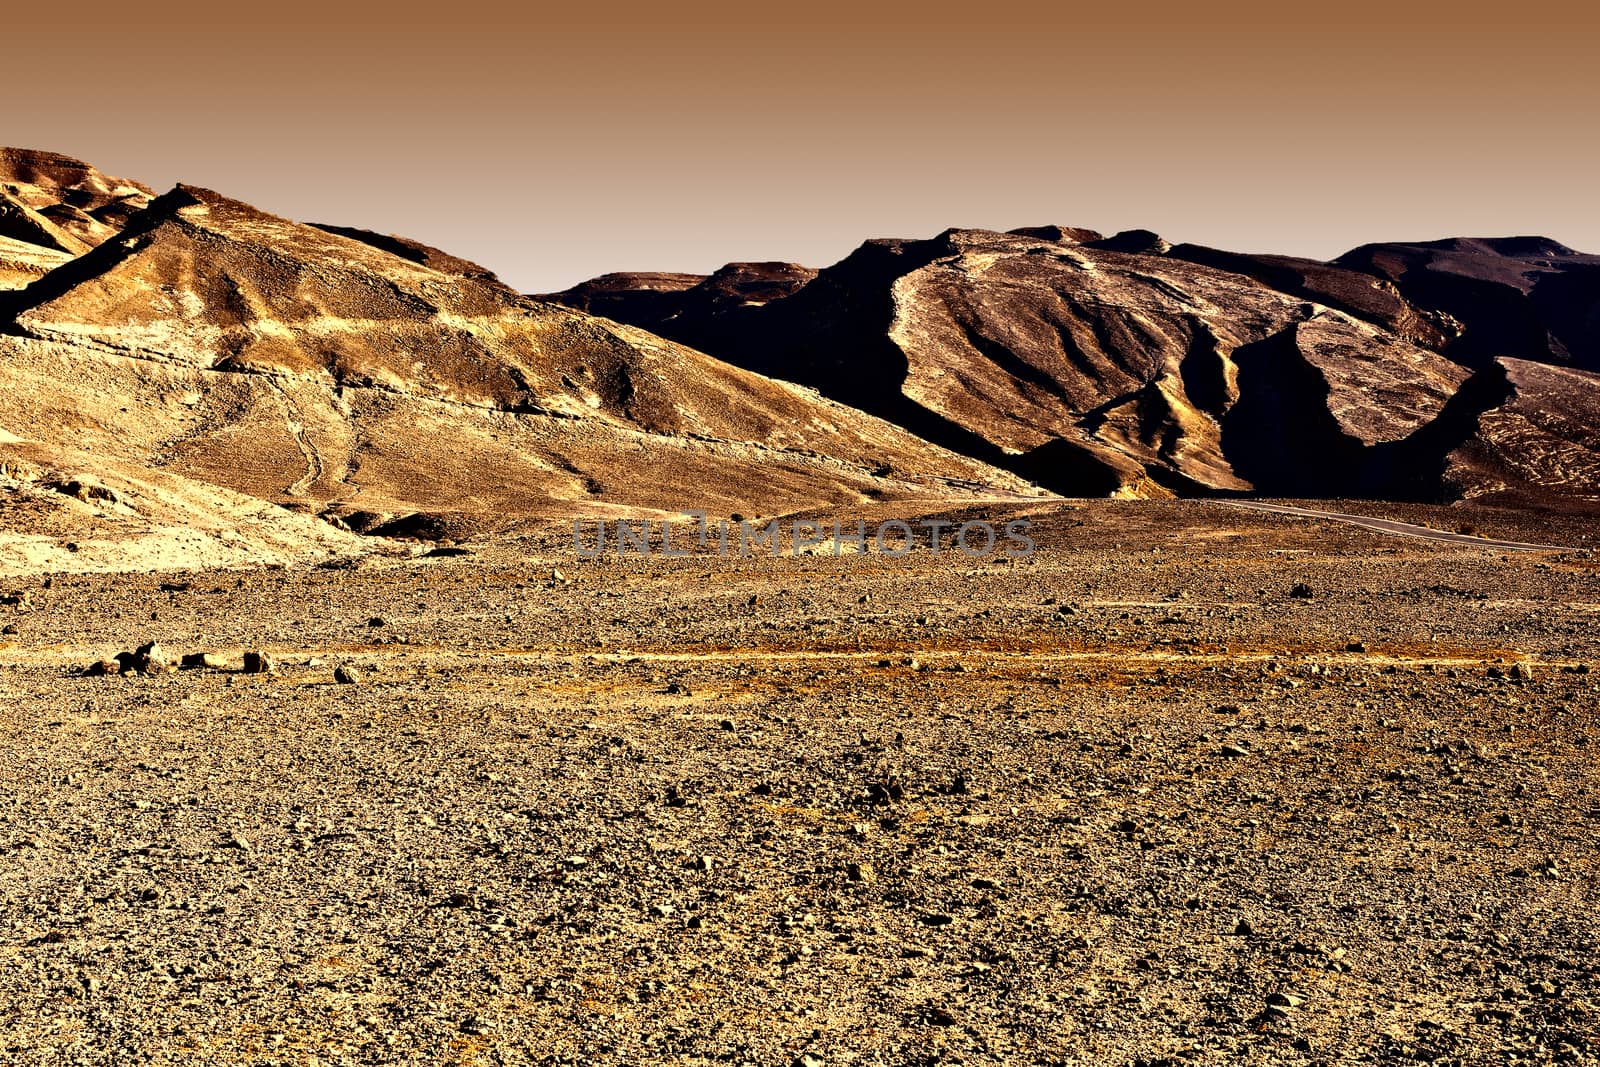 Rocky Hills of the Negev Desert in Israel at Sunset, Vintage Style Toned Picture